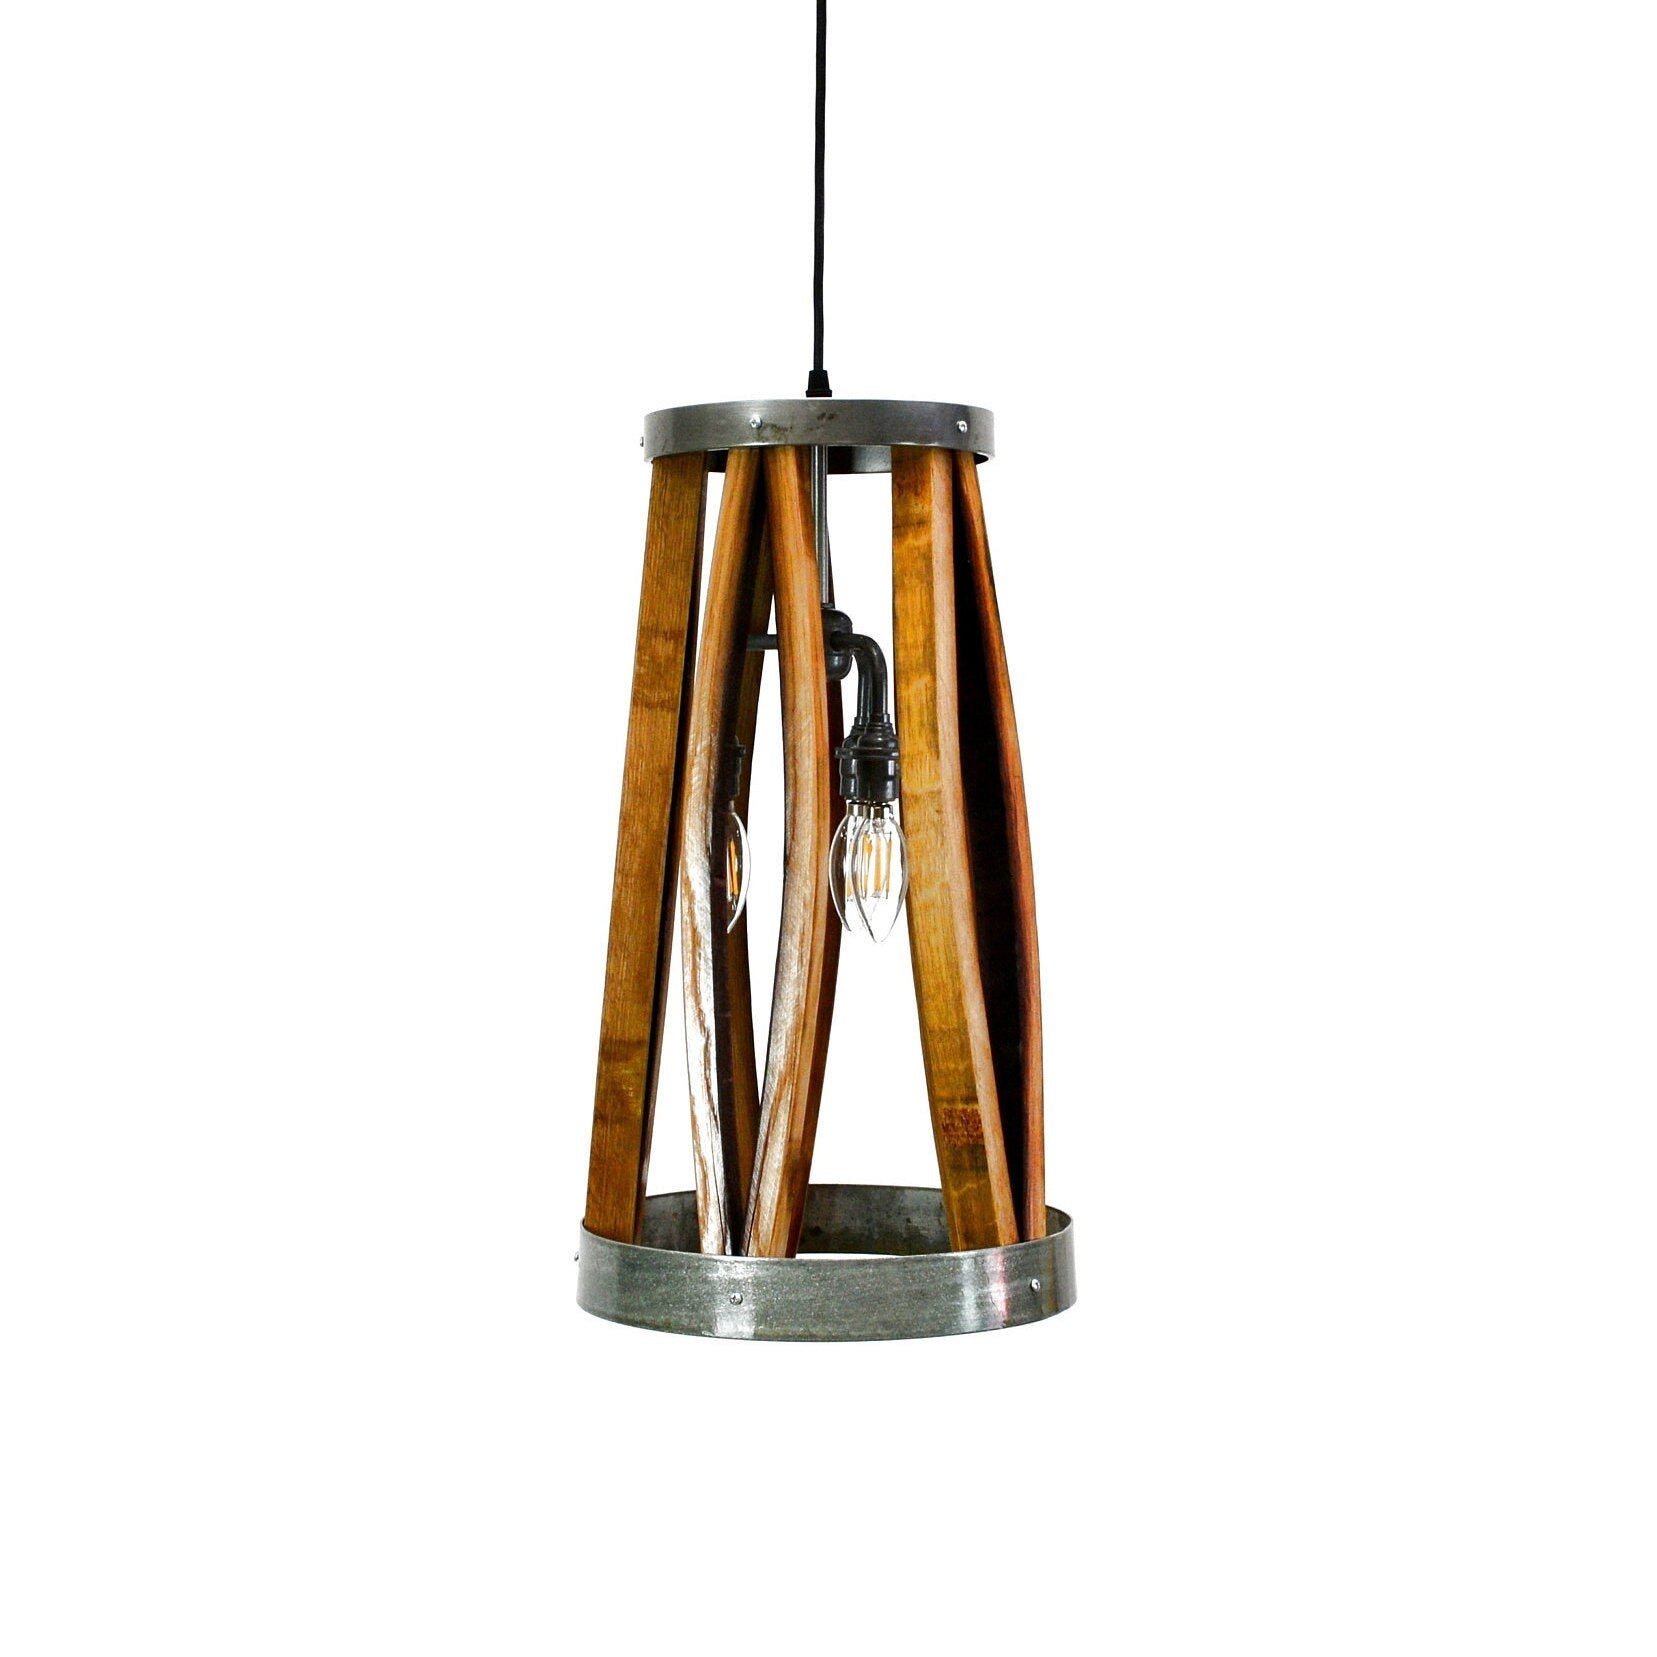 Wine Barrel Pendant Light - Bujur - Made from retired Napa wine barrels 100% Recycled!